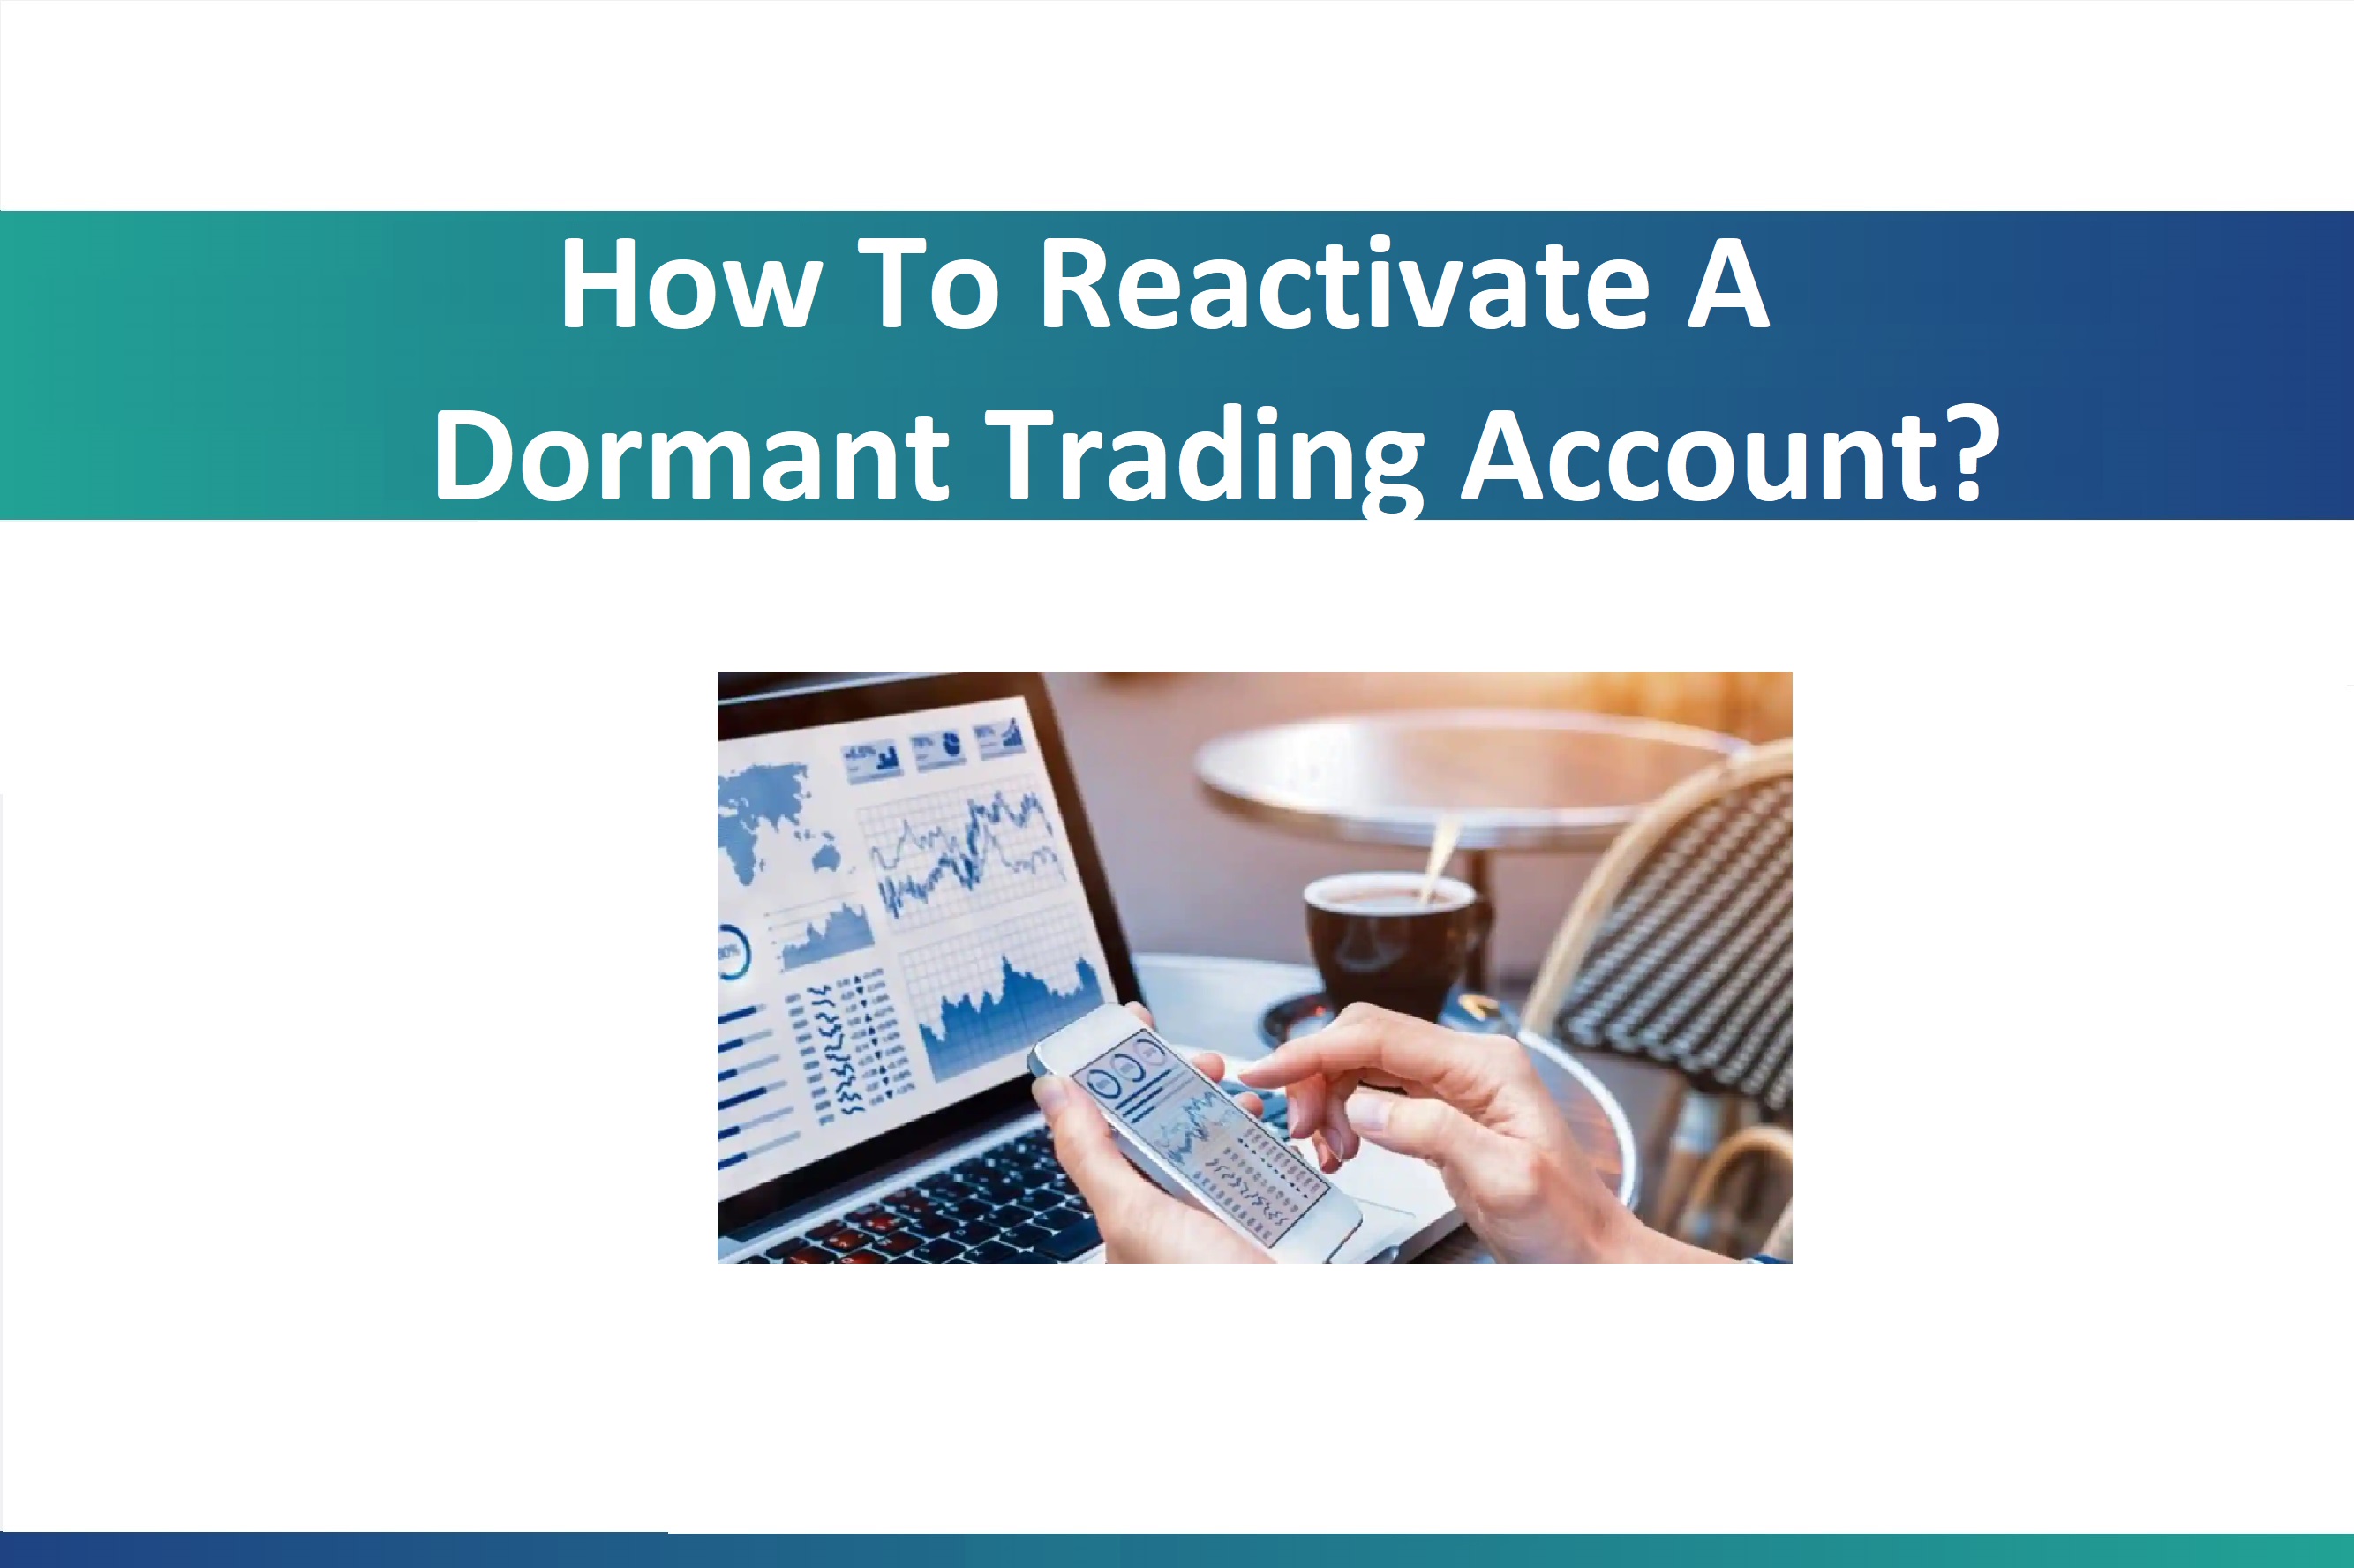 How To Reactivate A Dormant Trading Account?